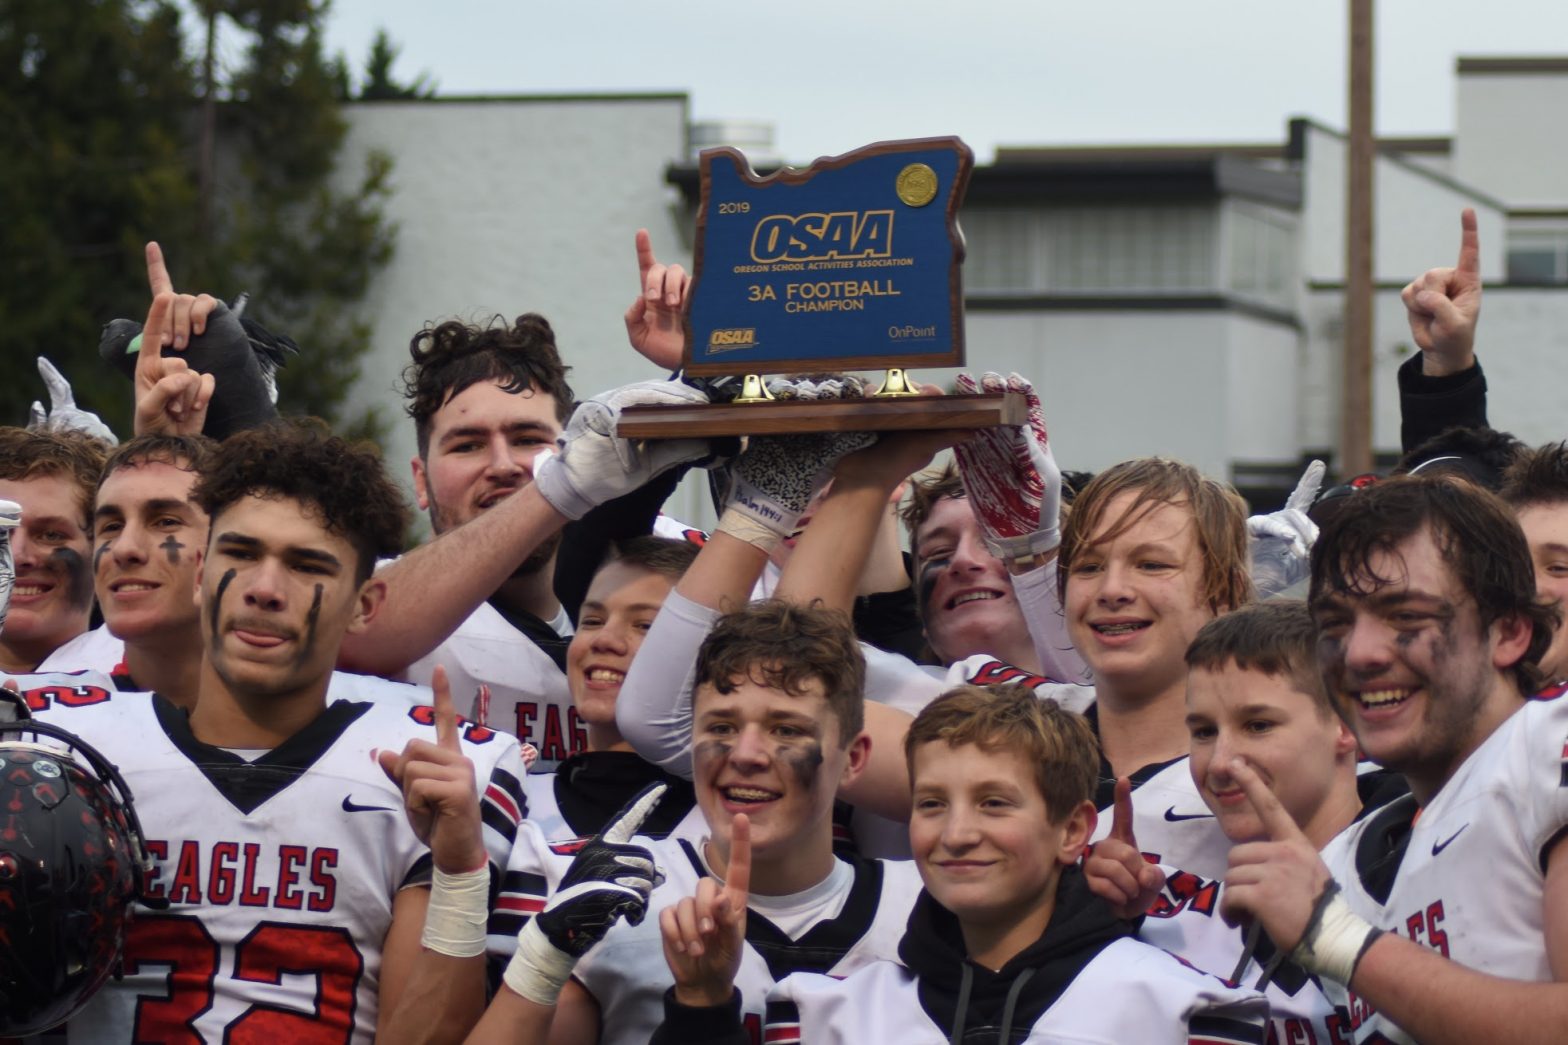 The New OSAA Schedule is Out, What Does it Mean? (Part One)